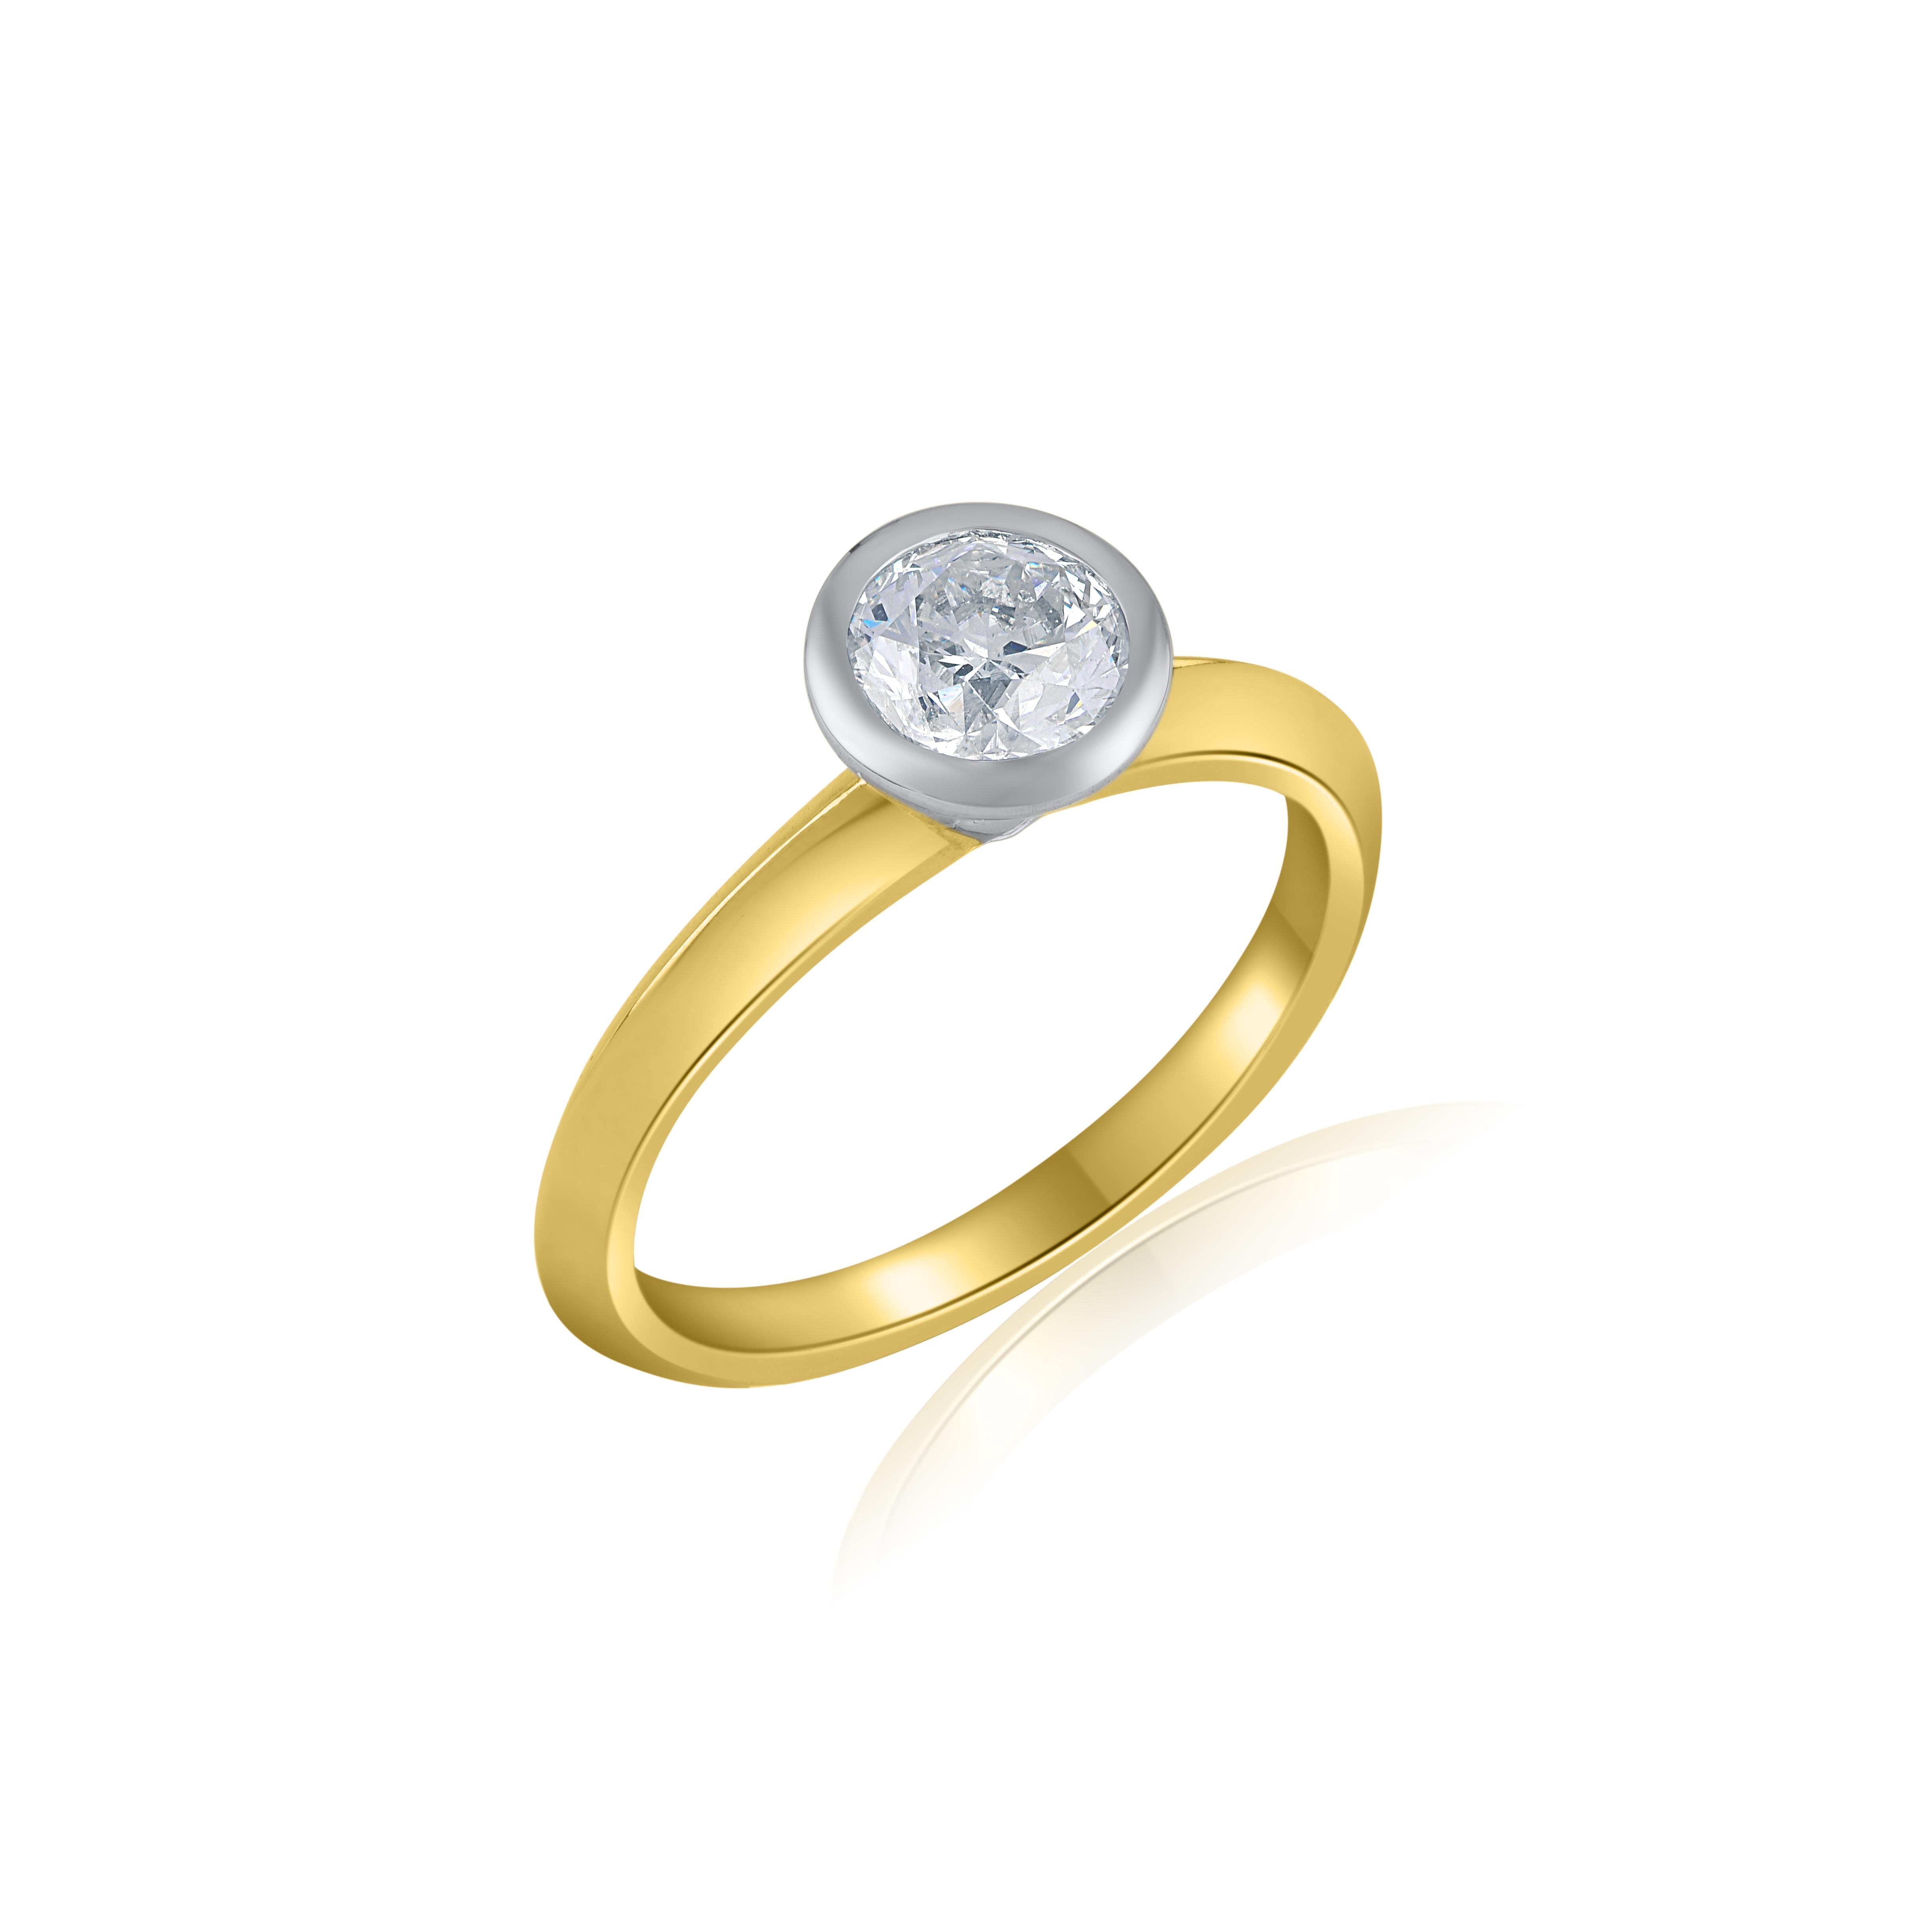 Elegantly designed, this ring is a 1 carat Solitaire Engagement ring in bezel setting. Diamonds are graded HI Color, I2 Clarity. This ring is made in Two tone gold with shank in yellow gold and bezel part in white gold. Currently available in US